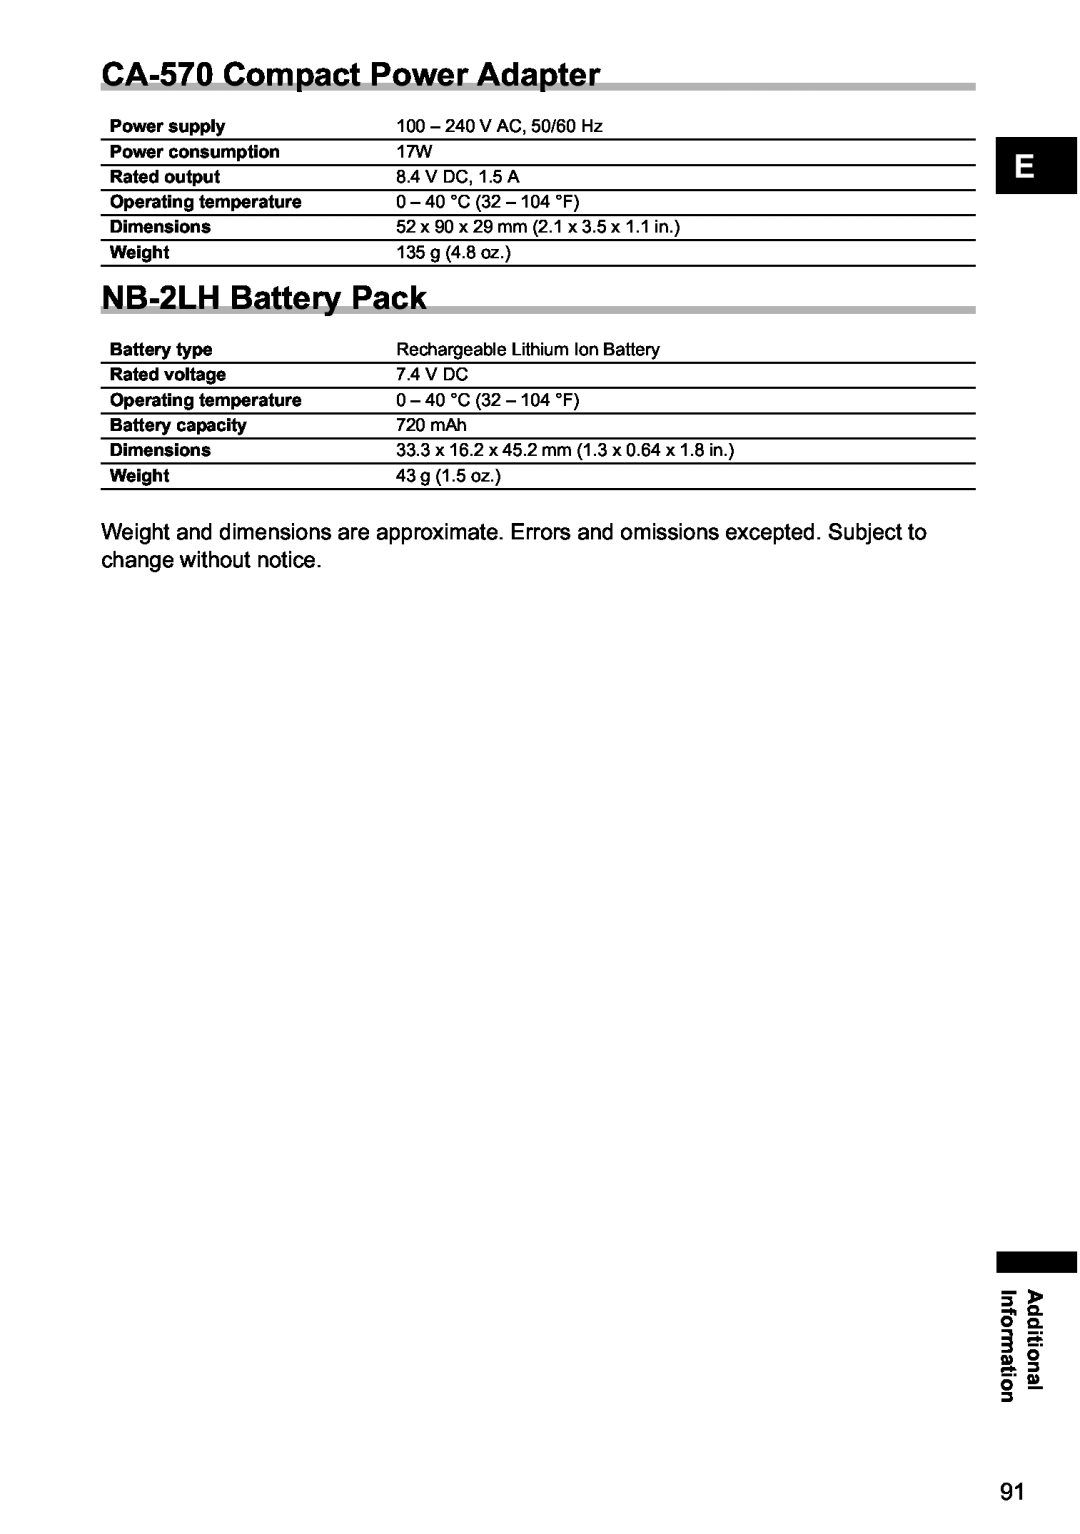 Canon MV800i, MV790 instruction manual CA-570 Compact Power Adapter, NB-2LH Battery Pack 